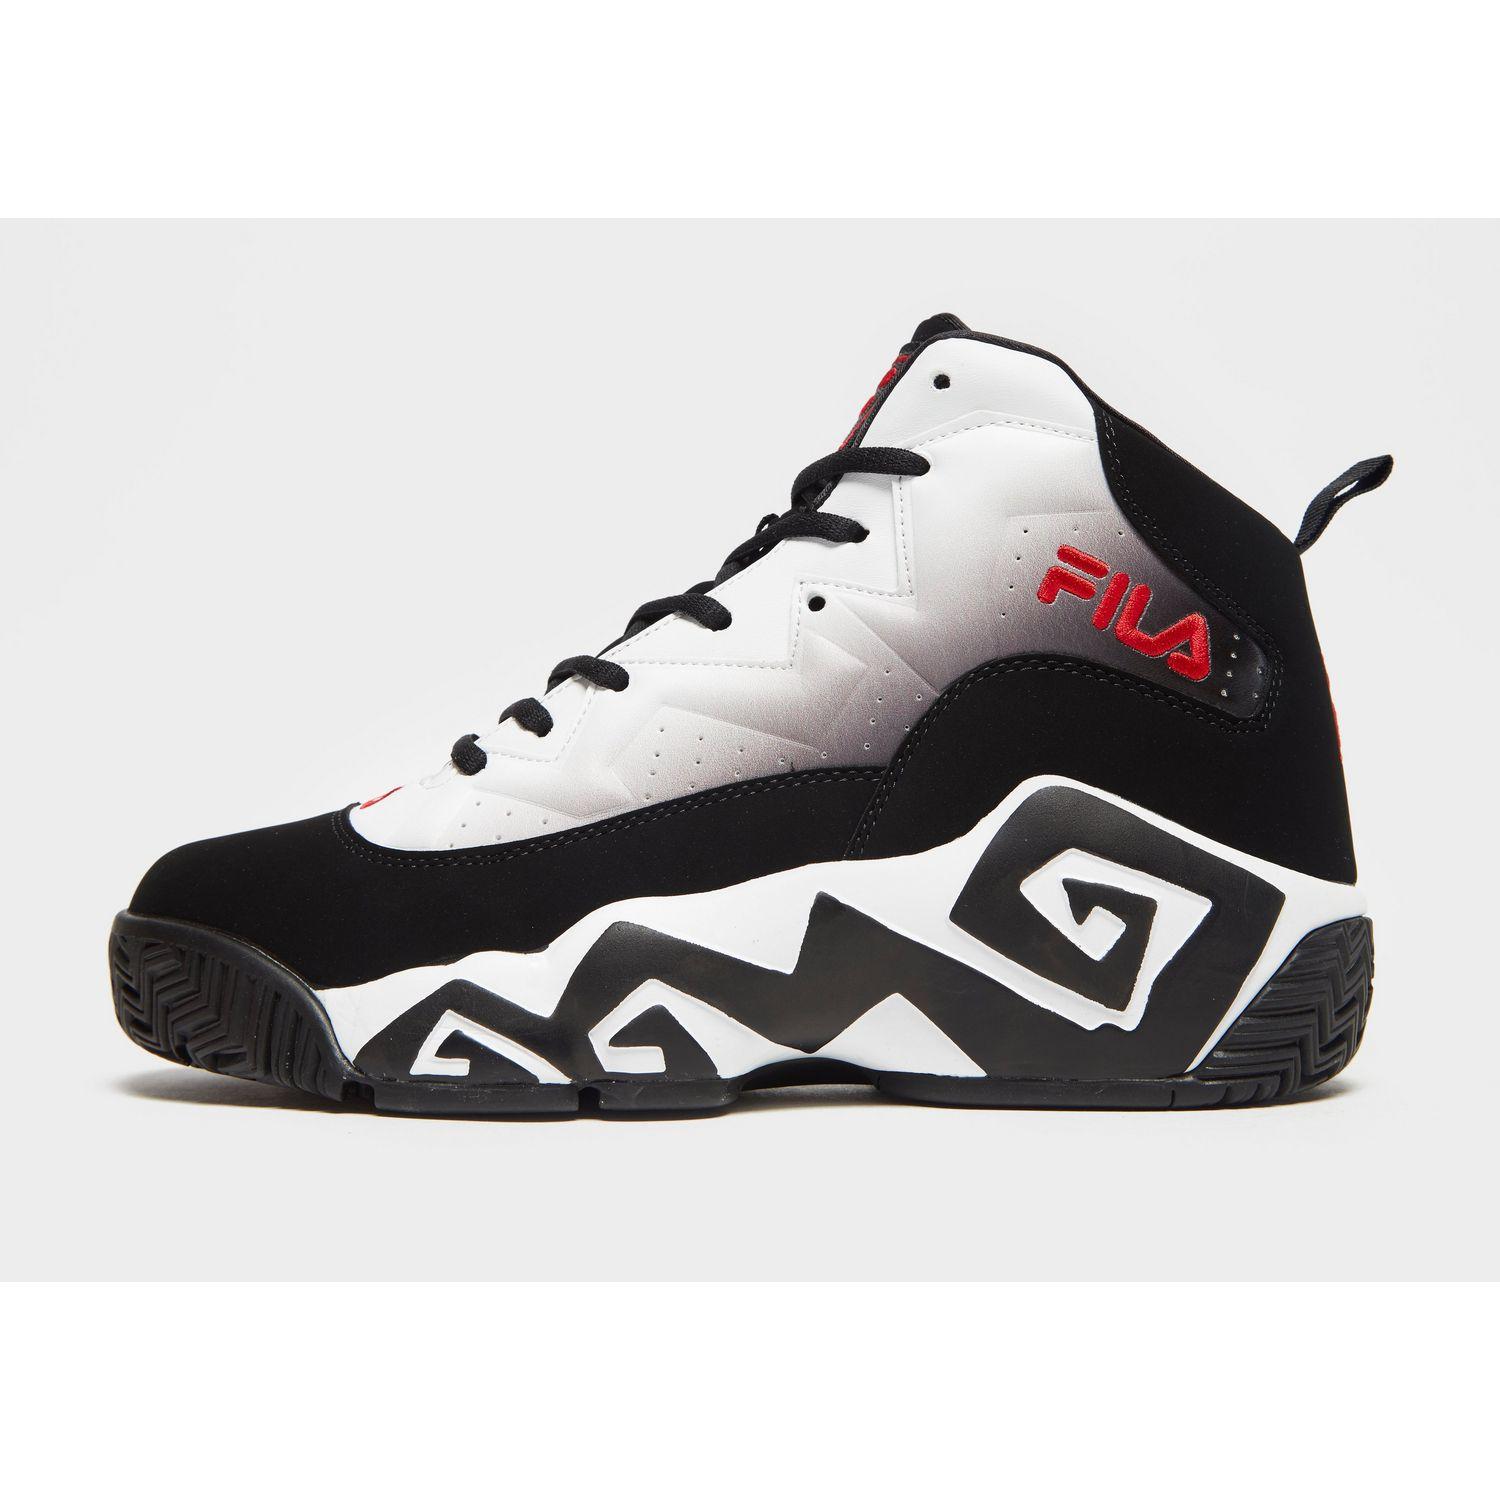 Fila Leather Mb Fade in Black/White/Red (Black) for Men - Lyst